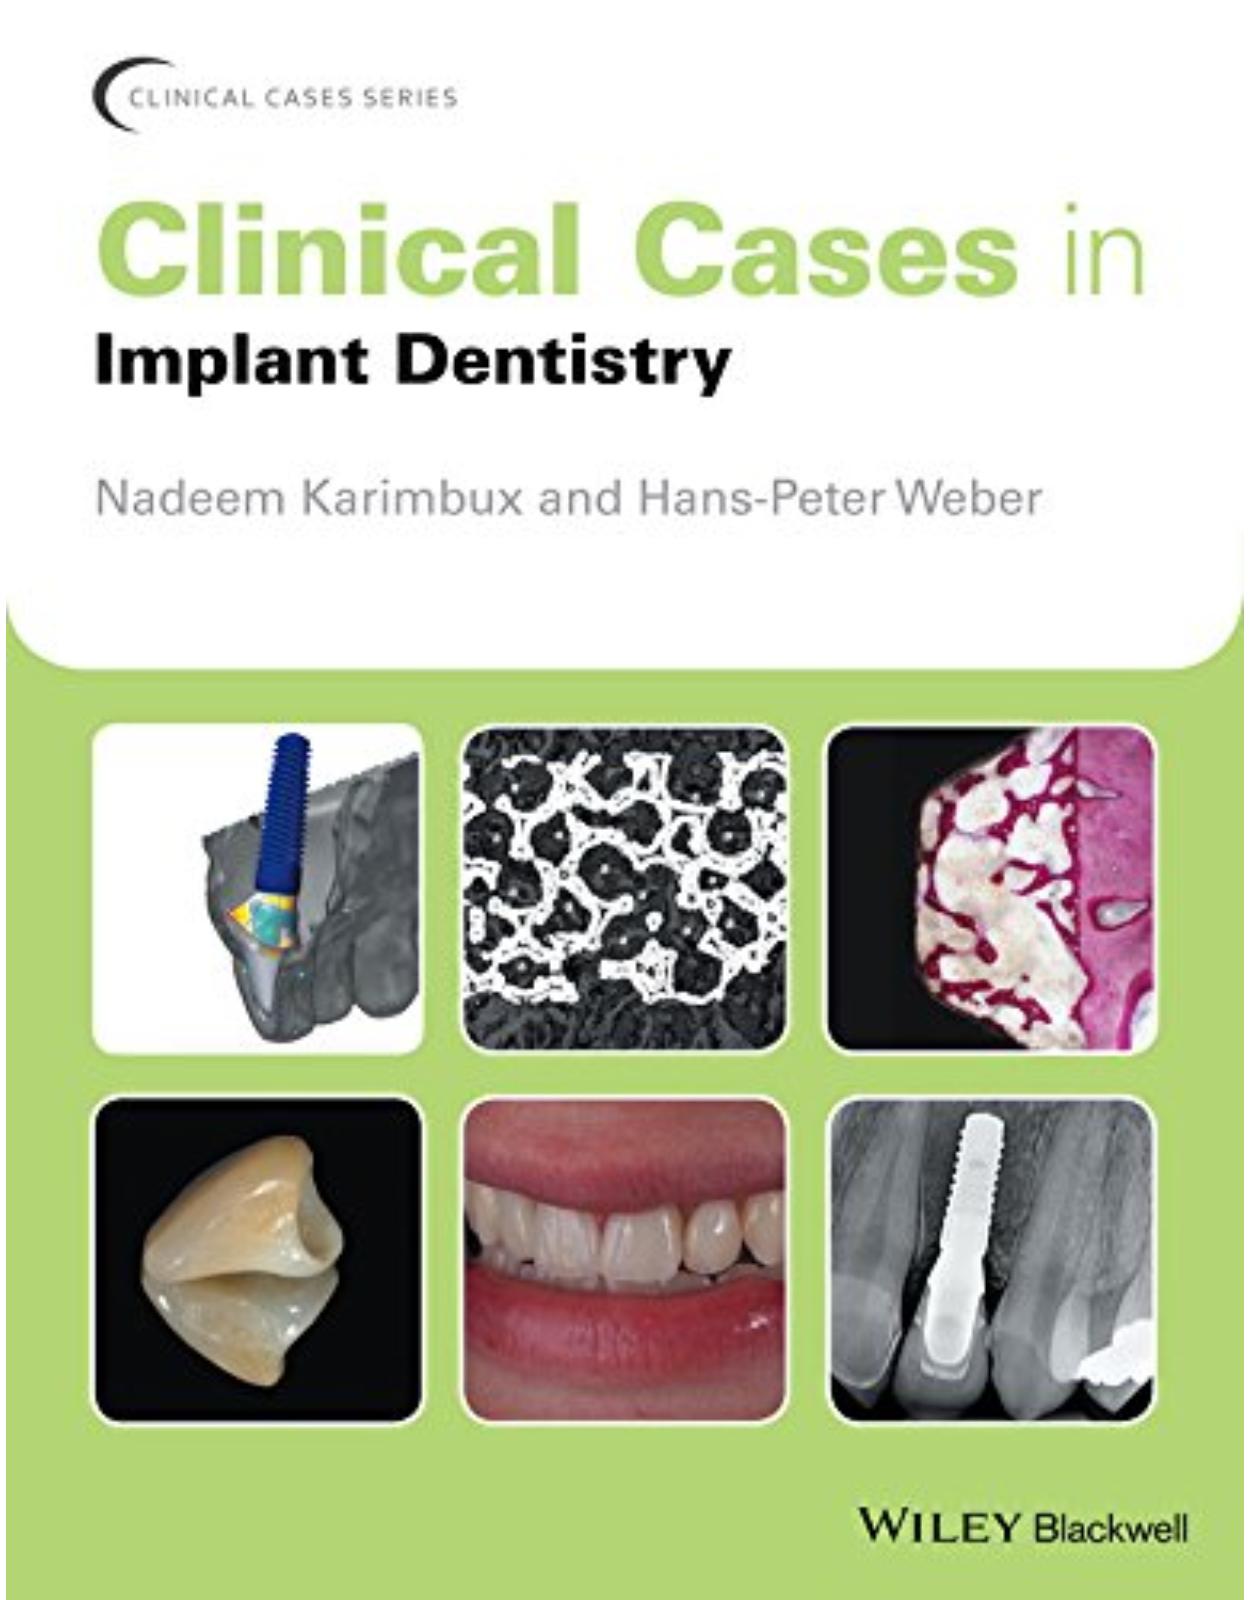 Clinical Cases in Implant Dentistry